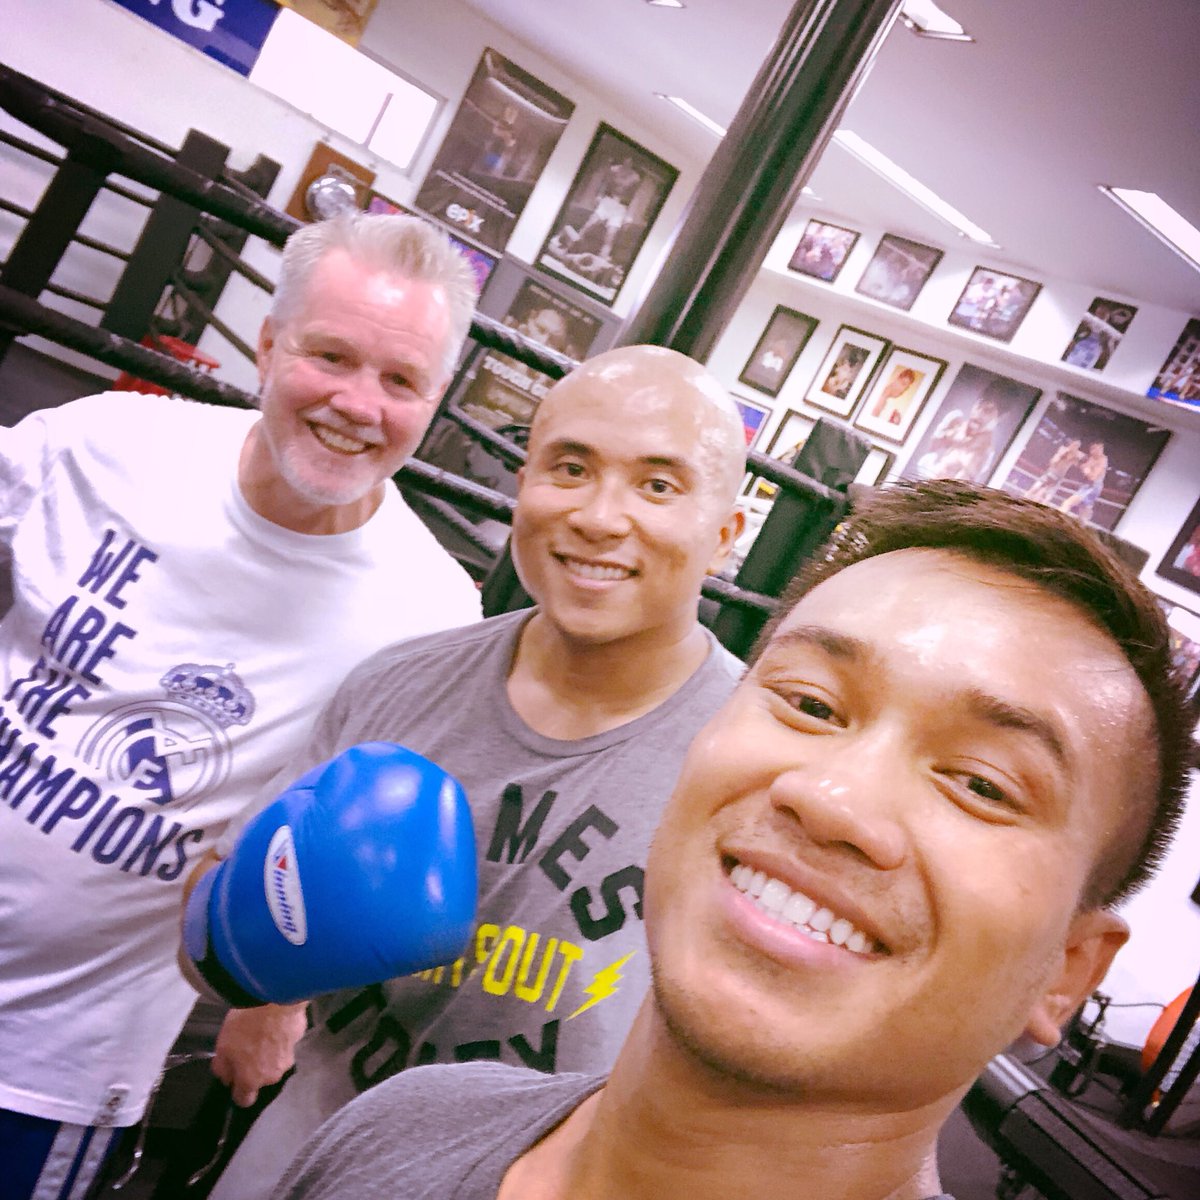 Quick selfie with my Coach @freddieroach and @858London #teaMGesta. Always a great time at the @wildcardboxingclub #wildcardboxingclub #adidas #adidasboxing #fastisfeared #boxing #philippines #pinoypride #mercitogesta #goldenboypromotions @adidasboxing @adidas @goldenboyboxing